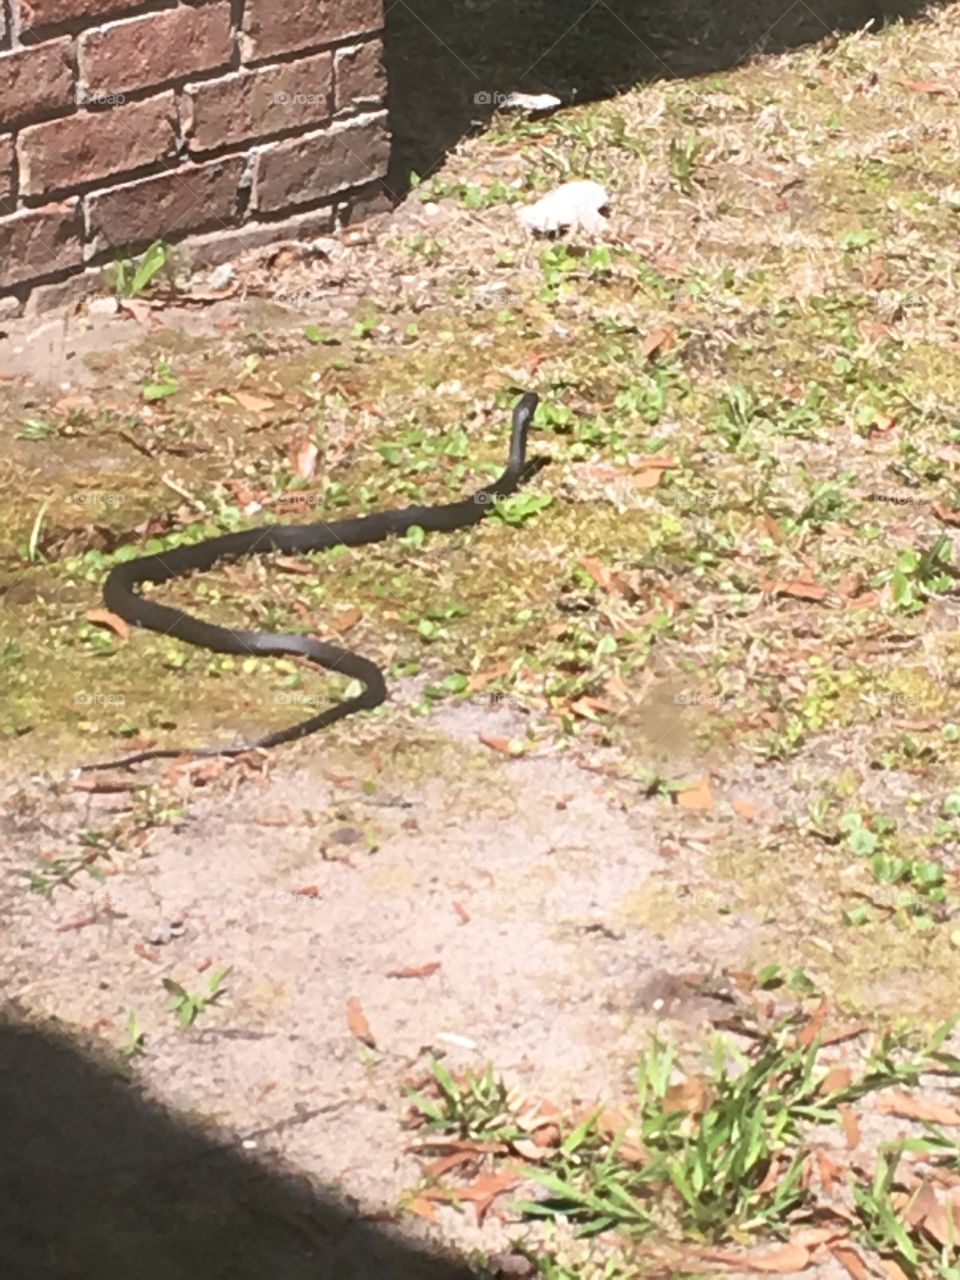 First warm day after days of not so springy temps and this black snake shows his ugly head! 